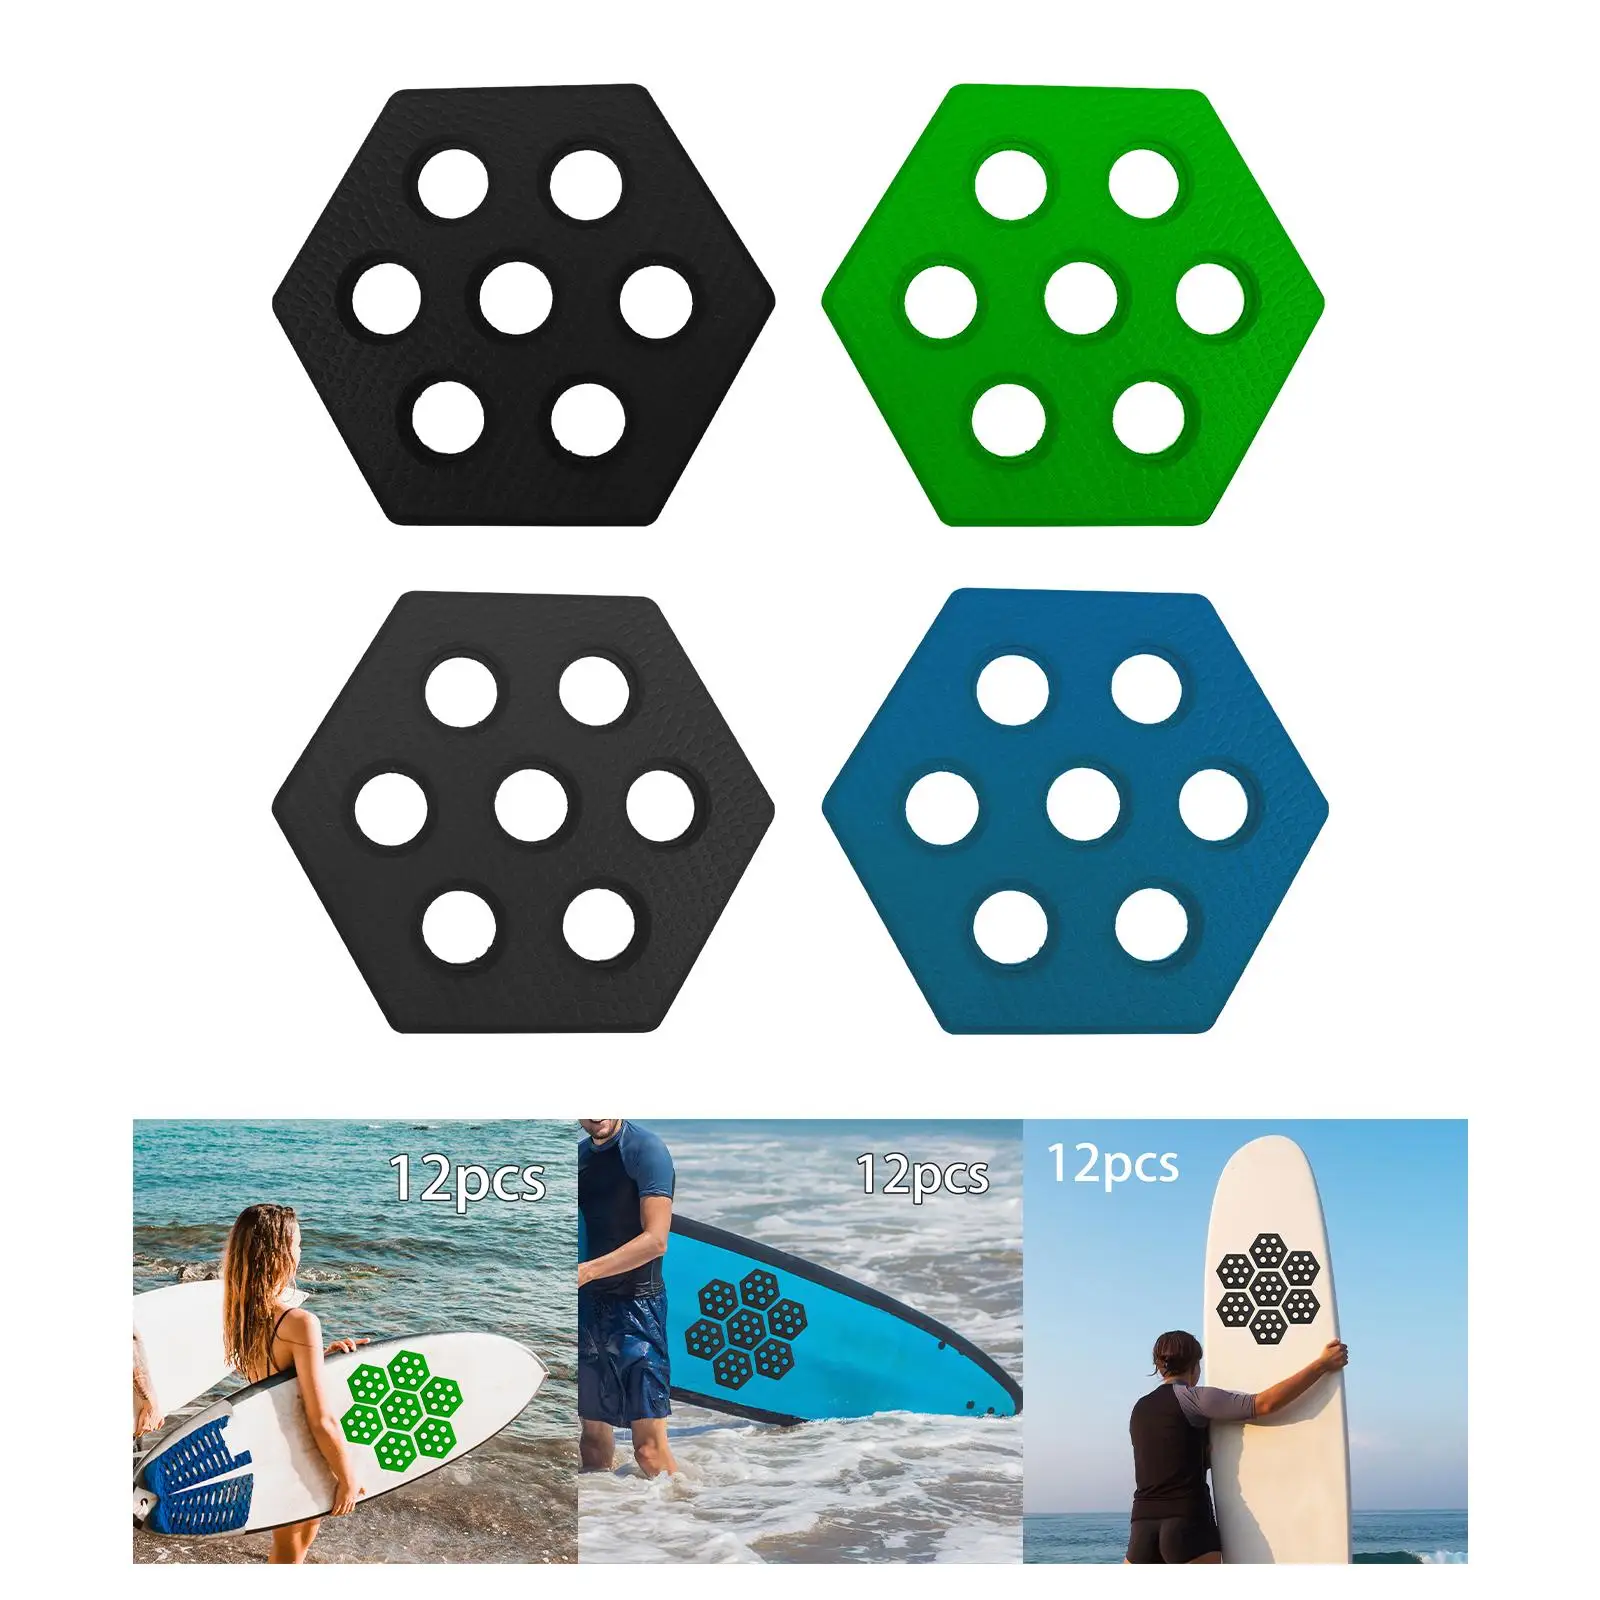 12x Hexagon Surfboard Traction Pads Anti Slip Mat Deck Grip for Grip Surf Skimboarding Water Sports Fish Board Surf Boards